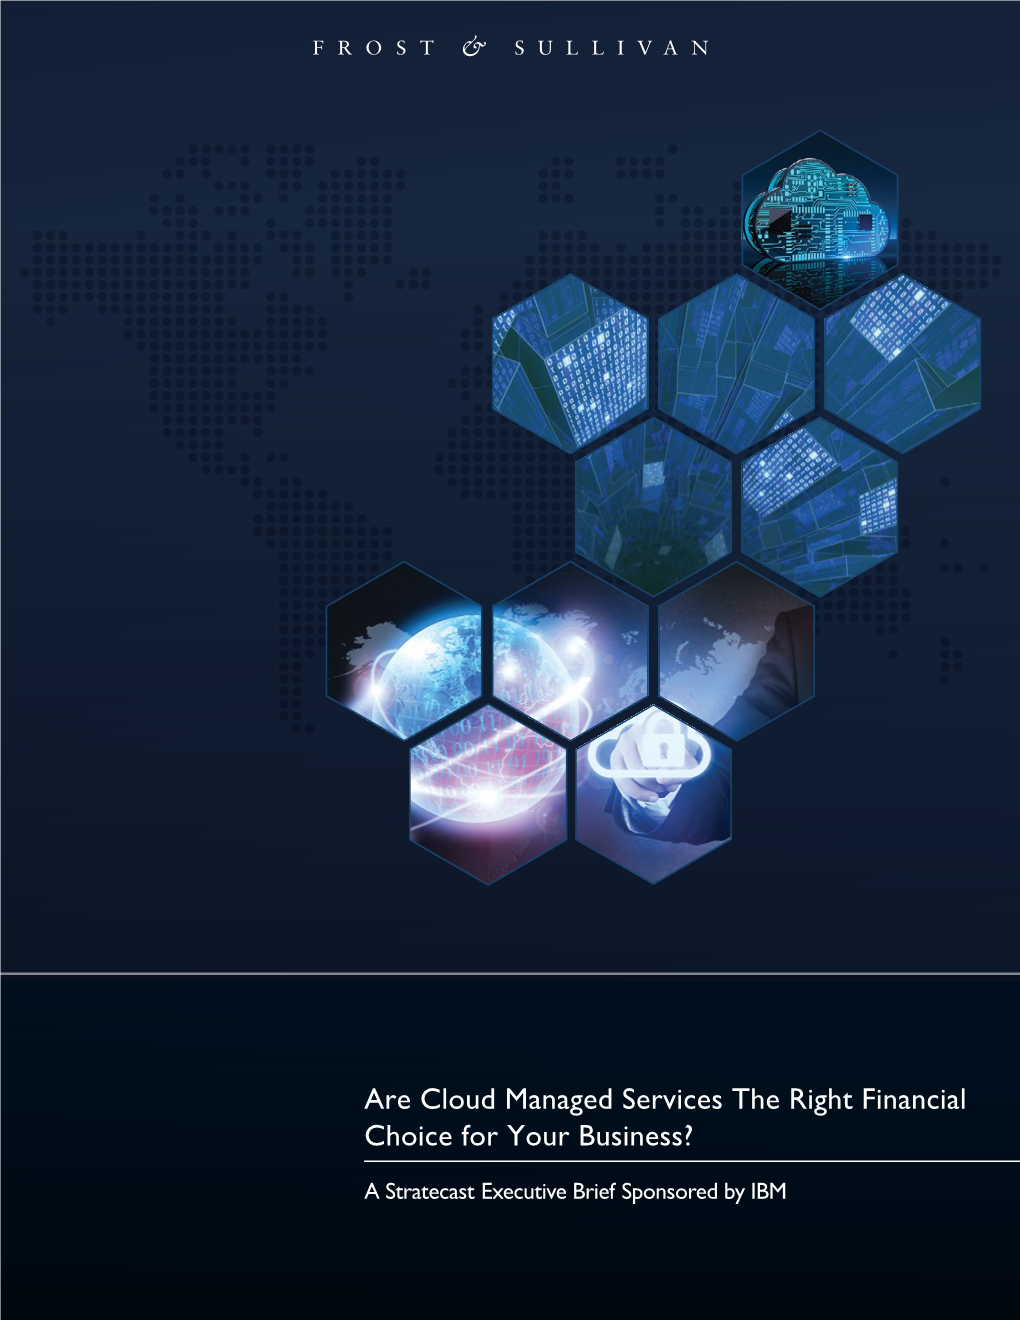 Are Cloud Managed Services the Right Financial Choice for Your Business?